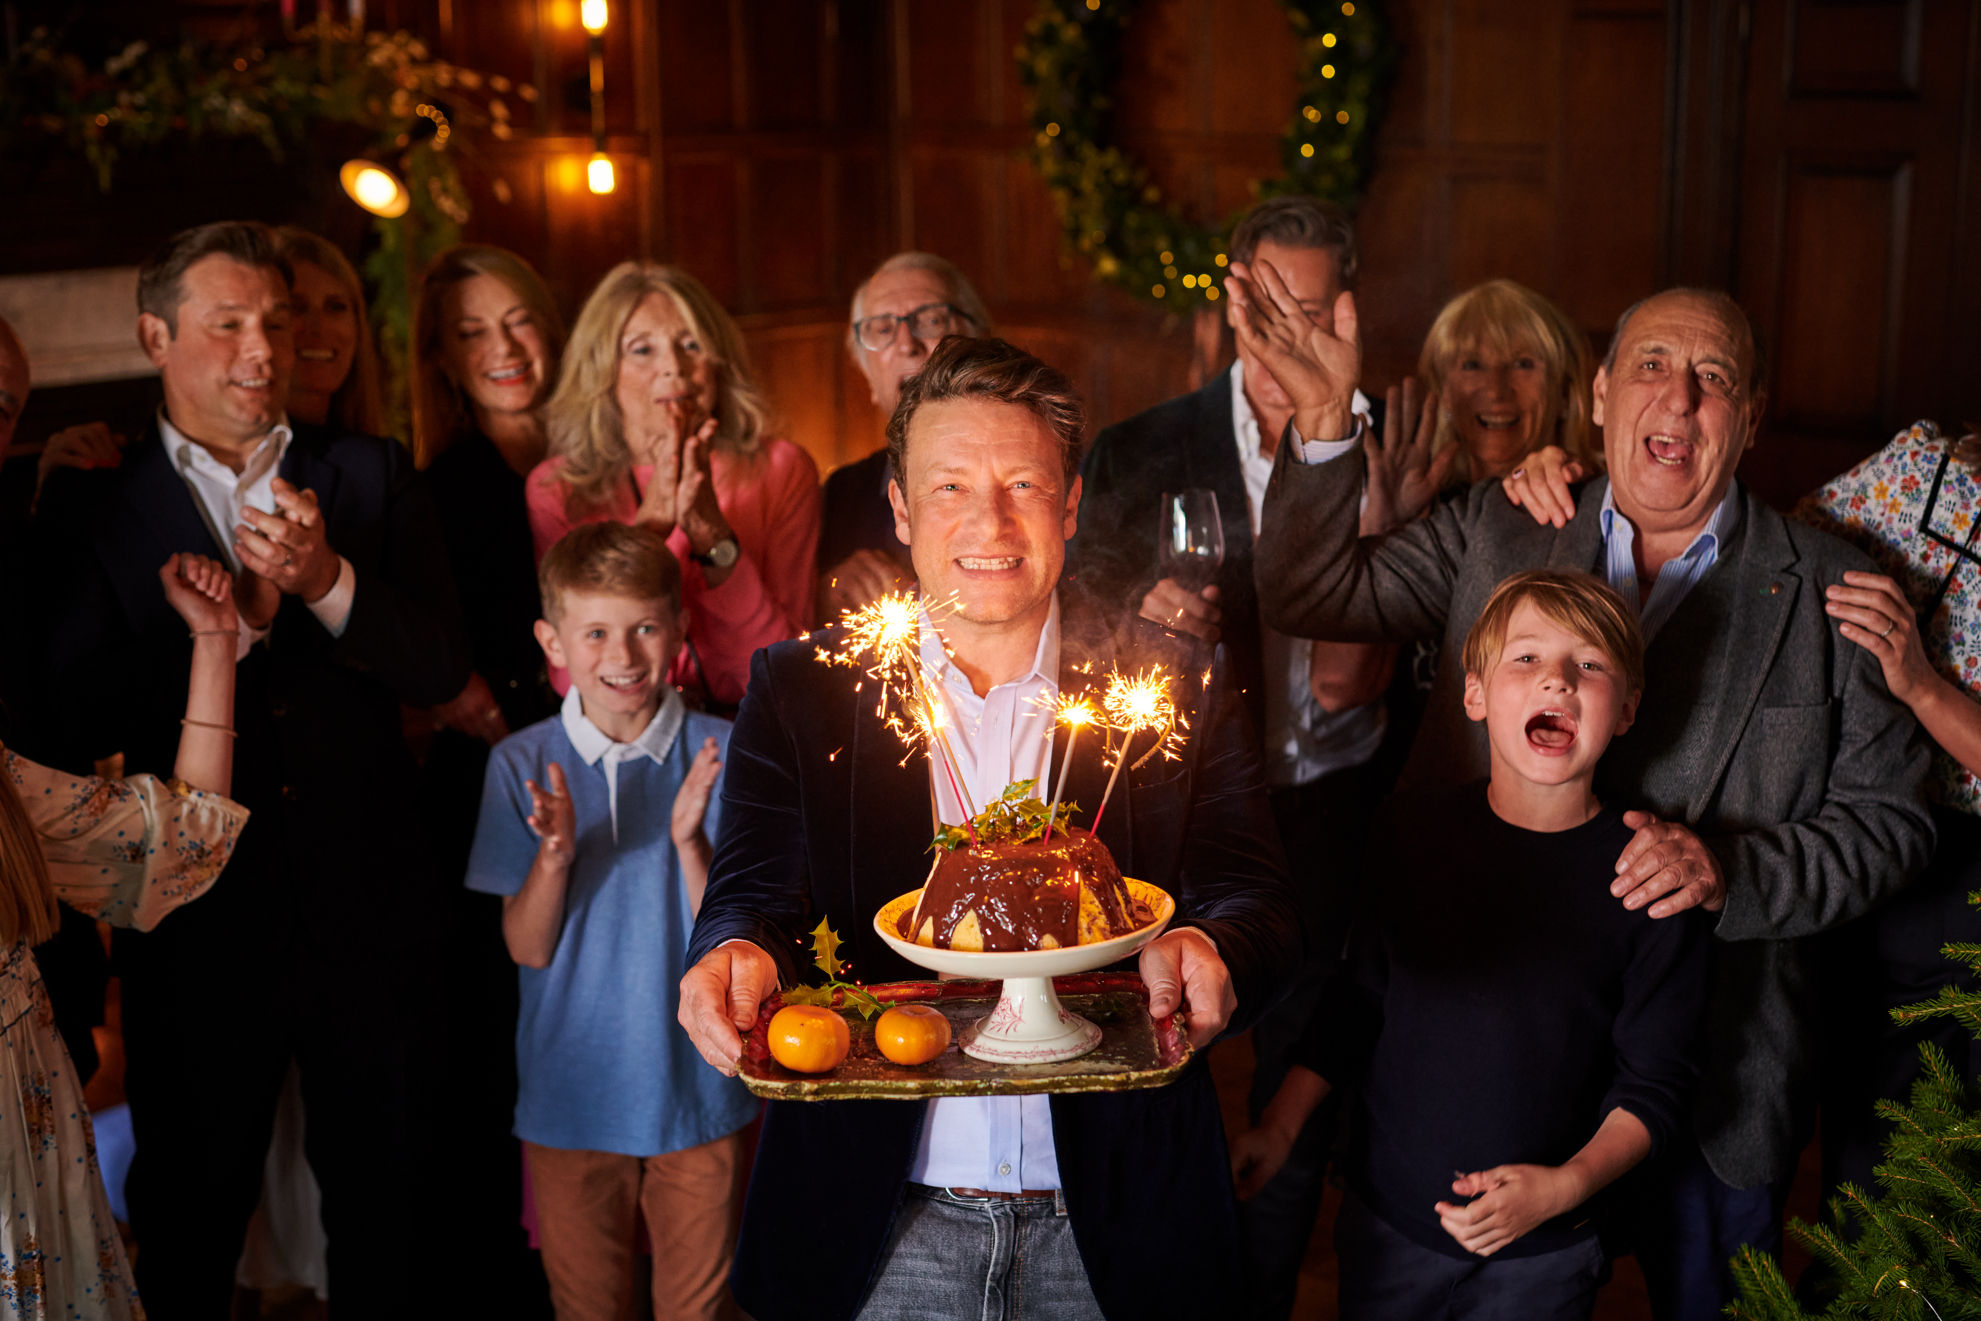 Jamie and family with a Winter bombe dessert, complete with sparklers!